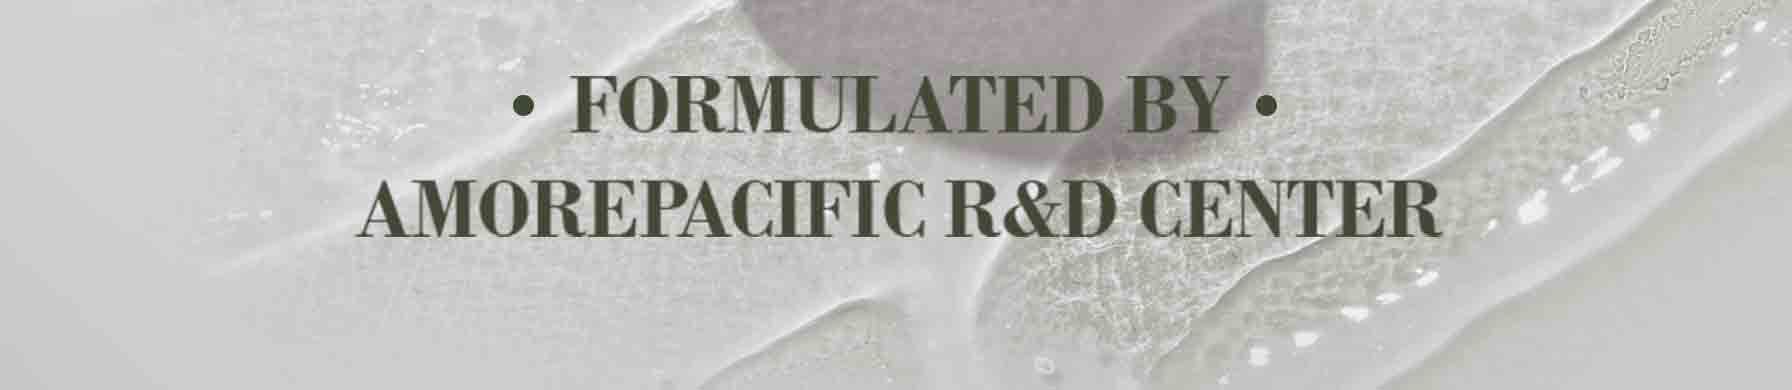 FORMULATED BY AMOREPACIFIC R&D CENTER